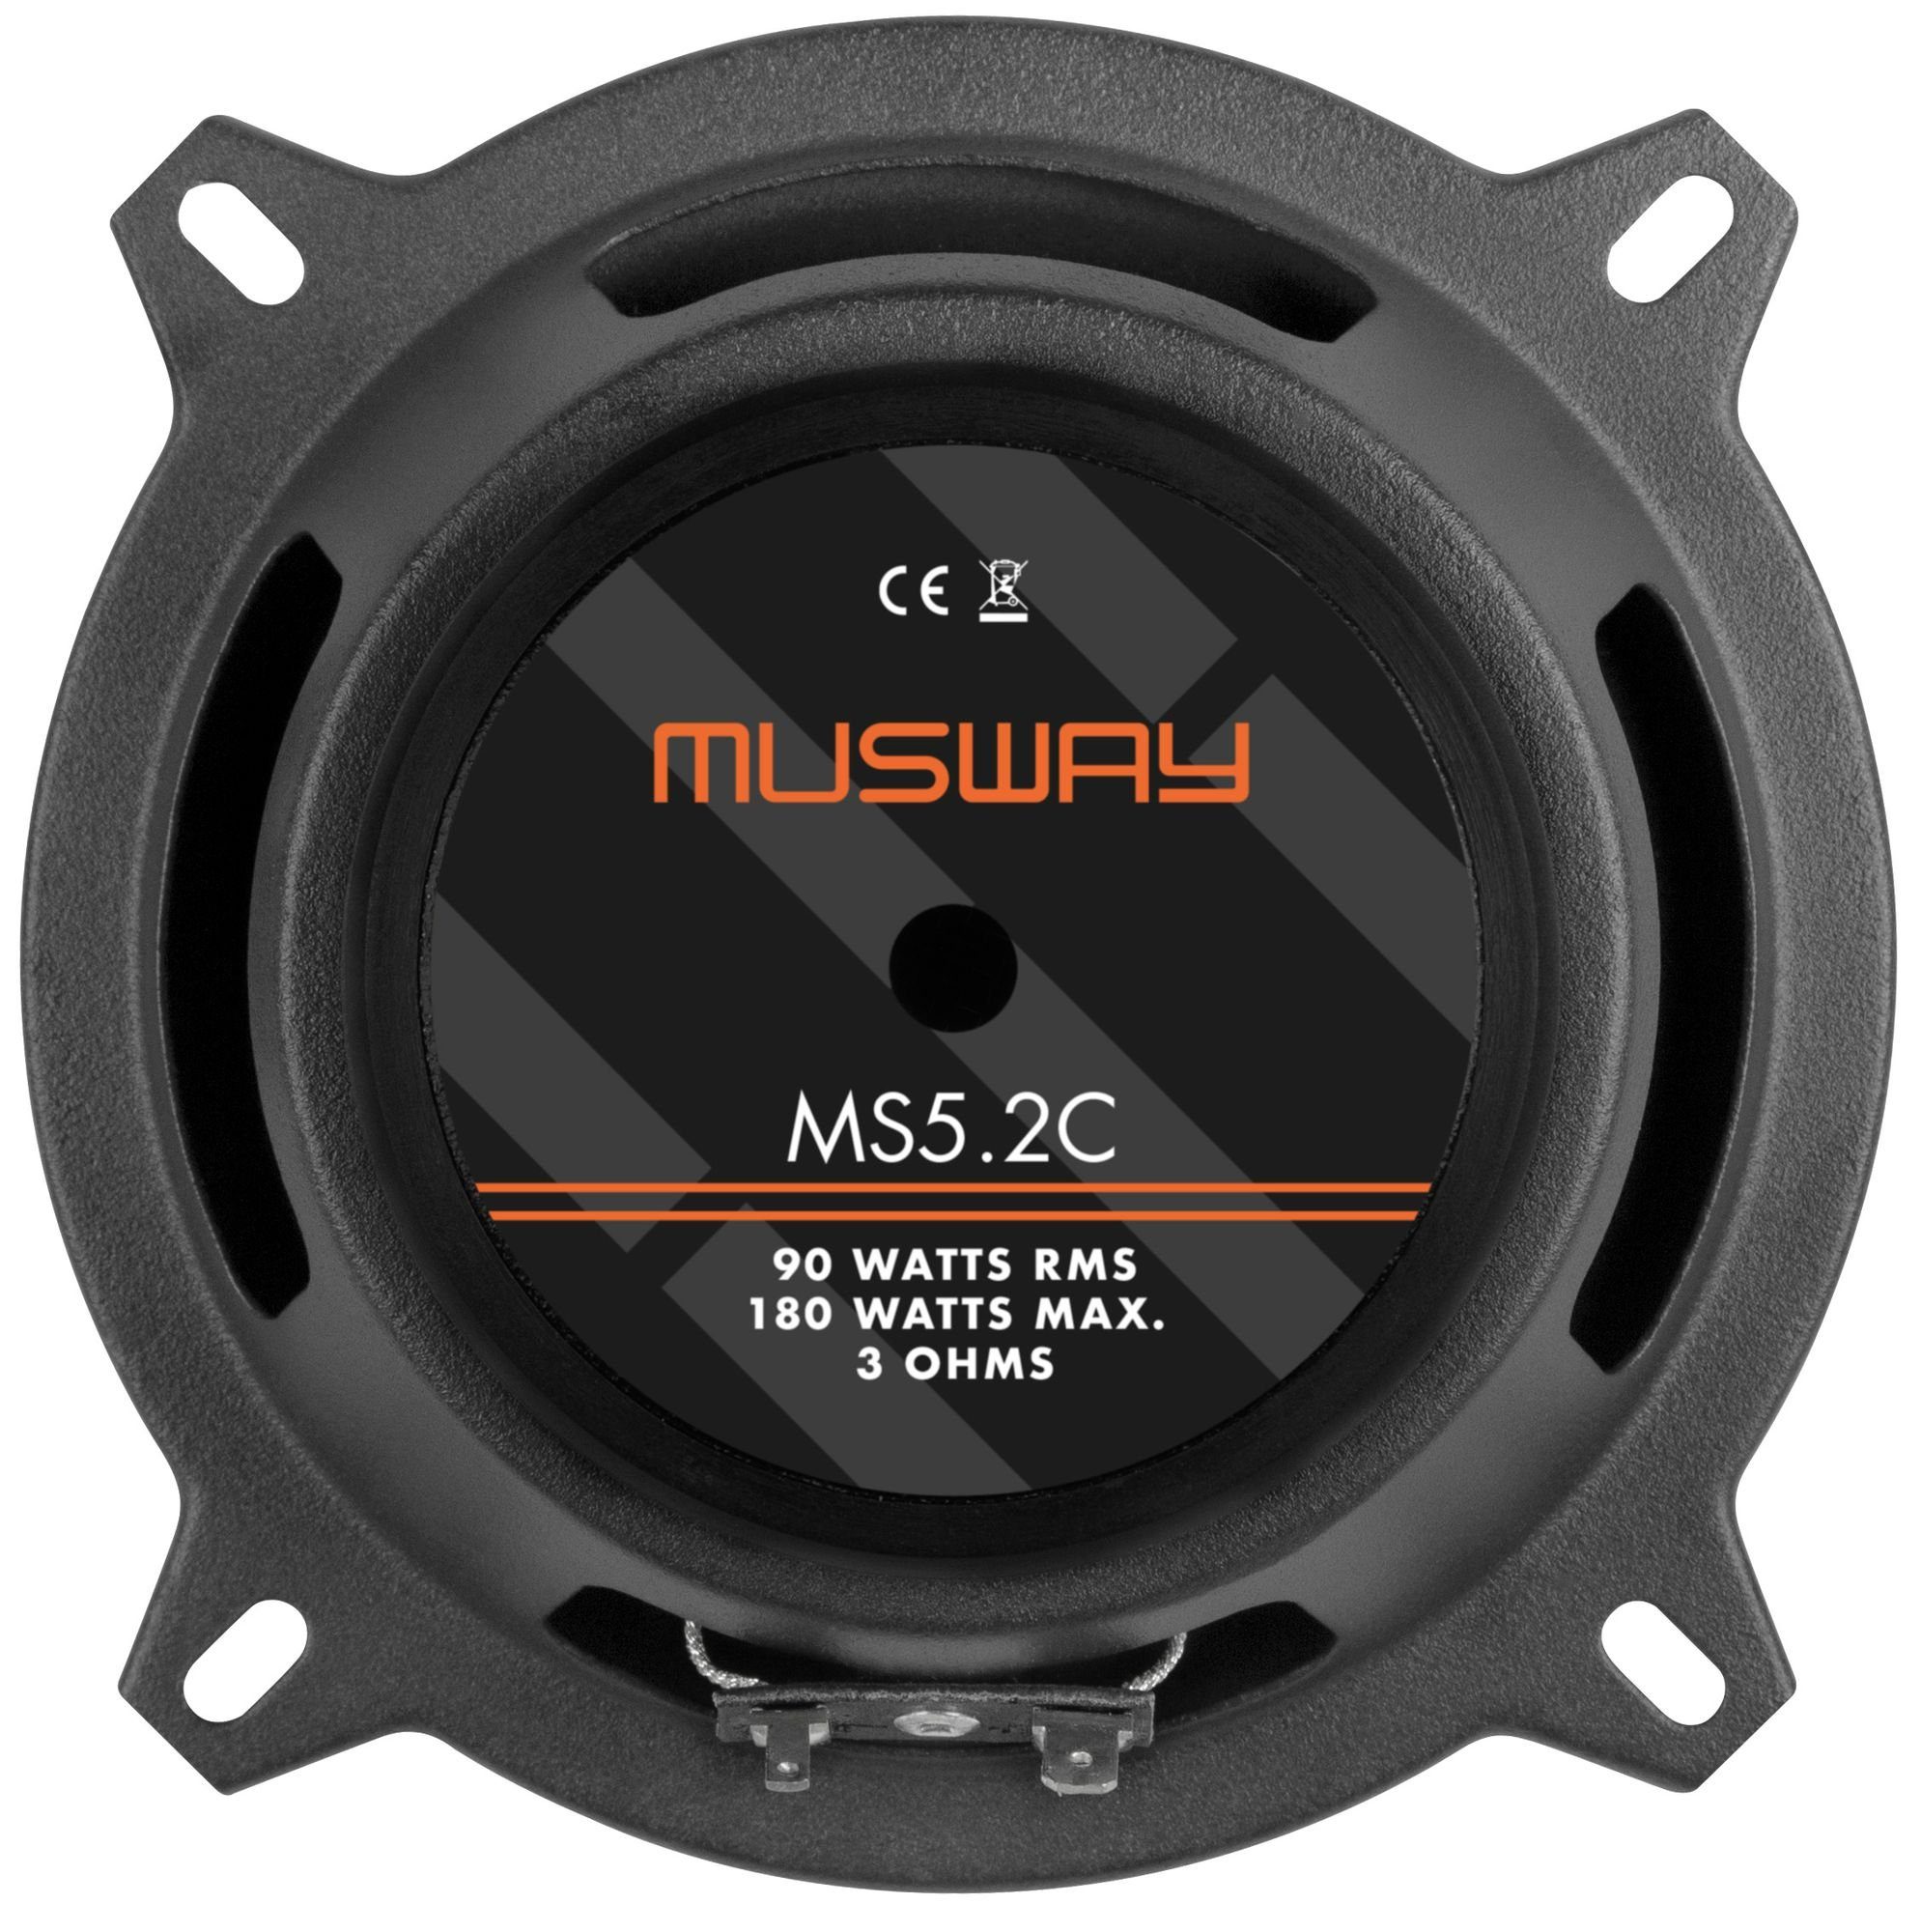 Musway Musway MS5.2C - 13cm - MS5.2C System) (Musway System Lautsprecher Auto-Lautsprecher Lautsprecher 13cm